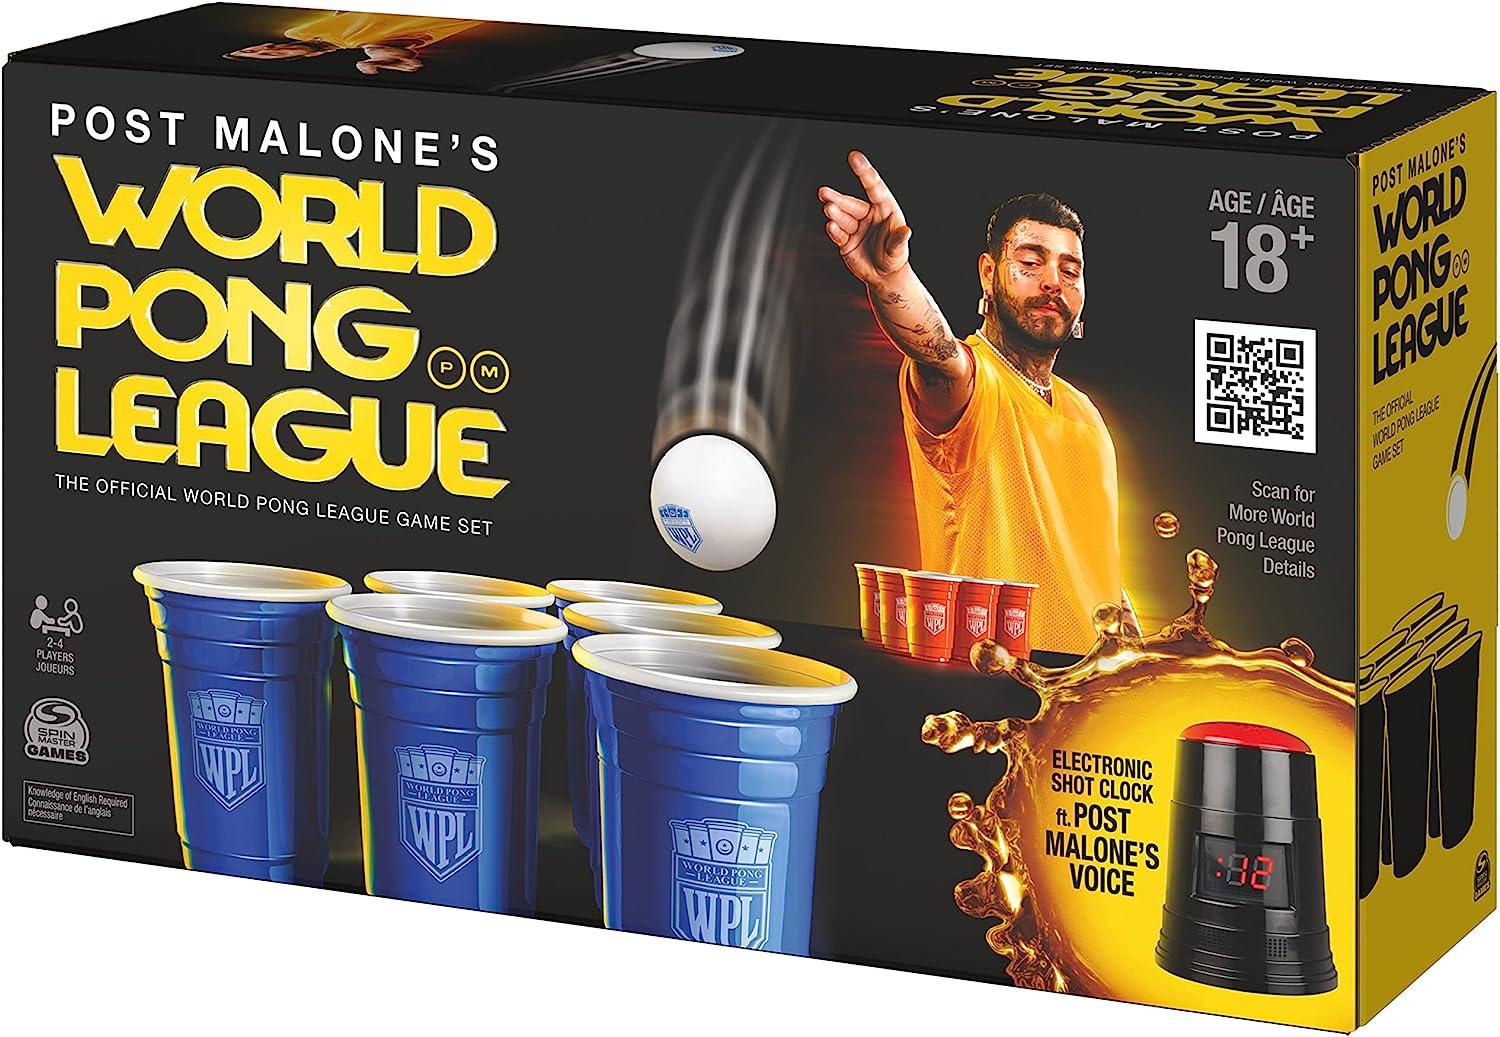 Post Malone, World Pong League Beer Pong Drinking Game for Bachelor Party  Outdoor Games with Plastic Cups Ping Pong Balls, for Adults Ages 18 and up